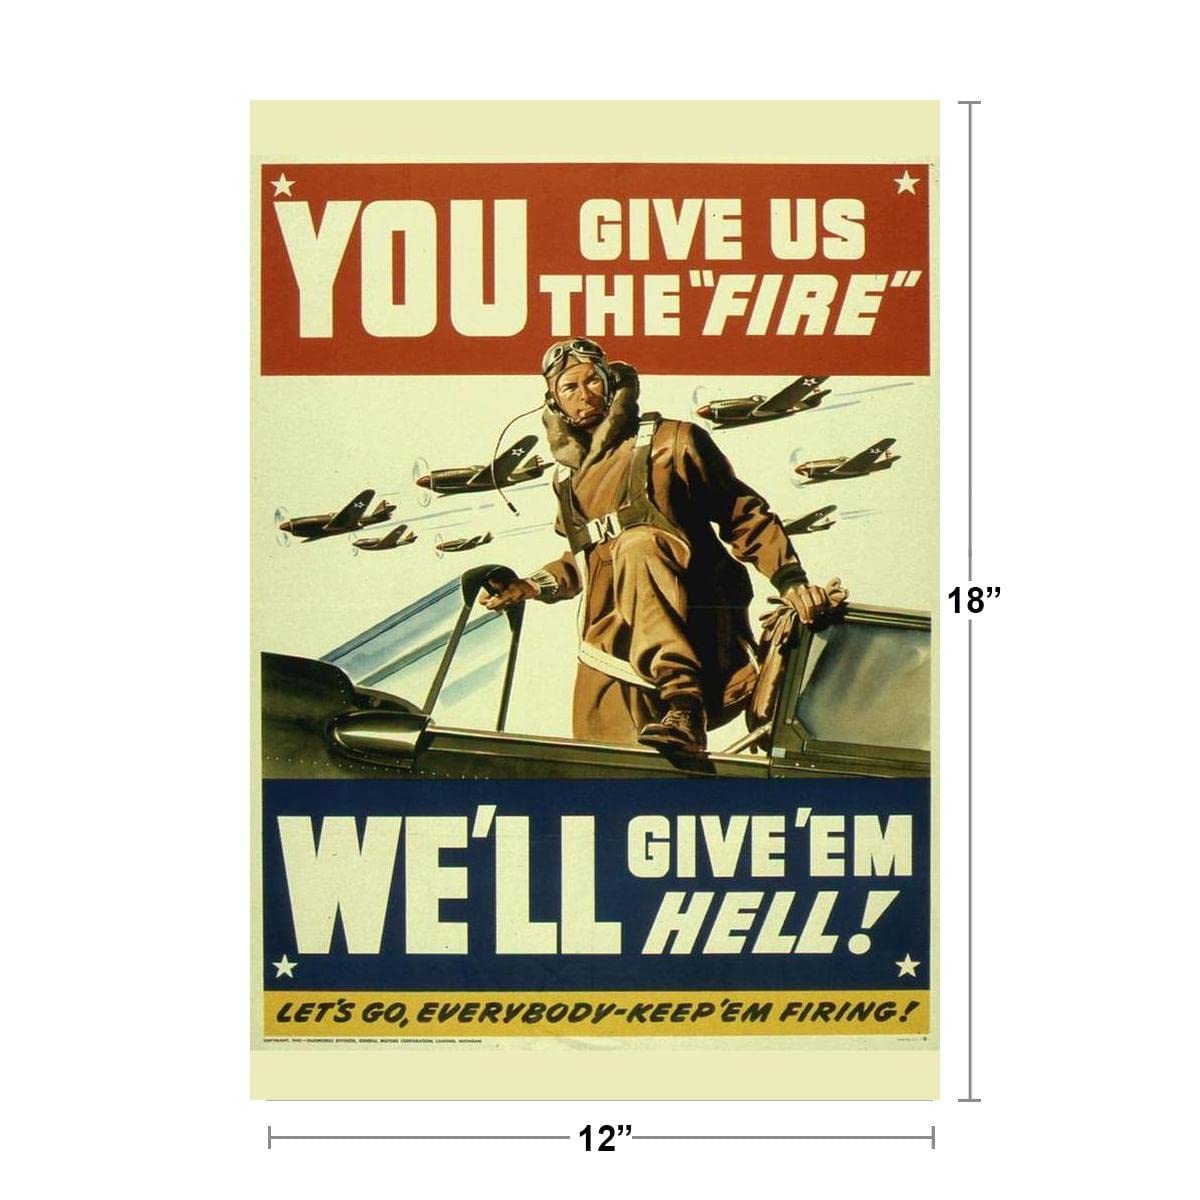 You Give Us the Fire Well Give Em Hell! Vintage World War II Reprint Cool Wall Decor Art Print Poster 12x18